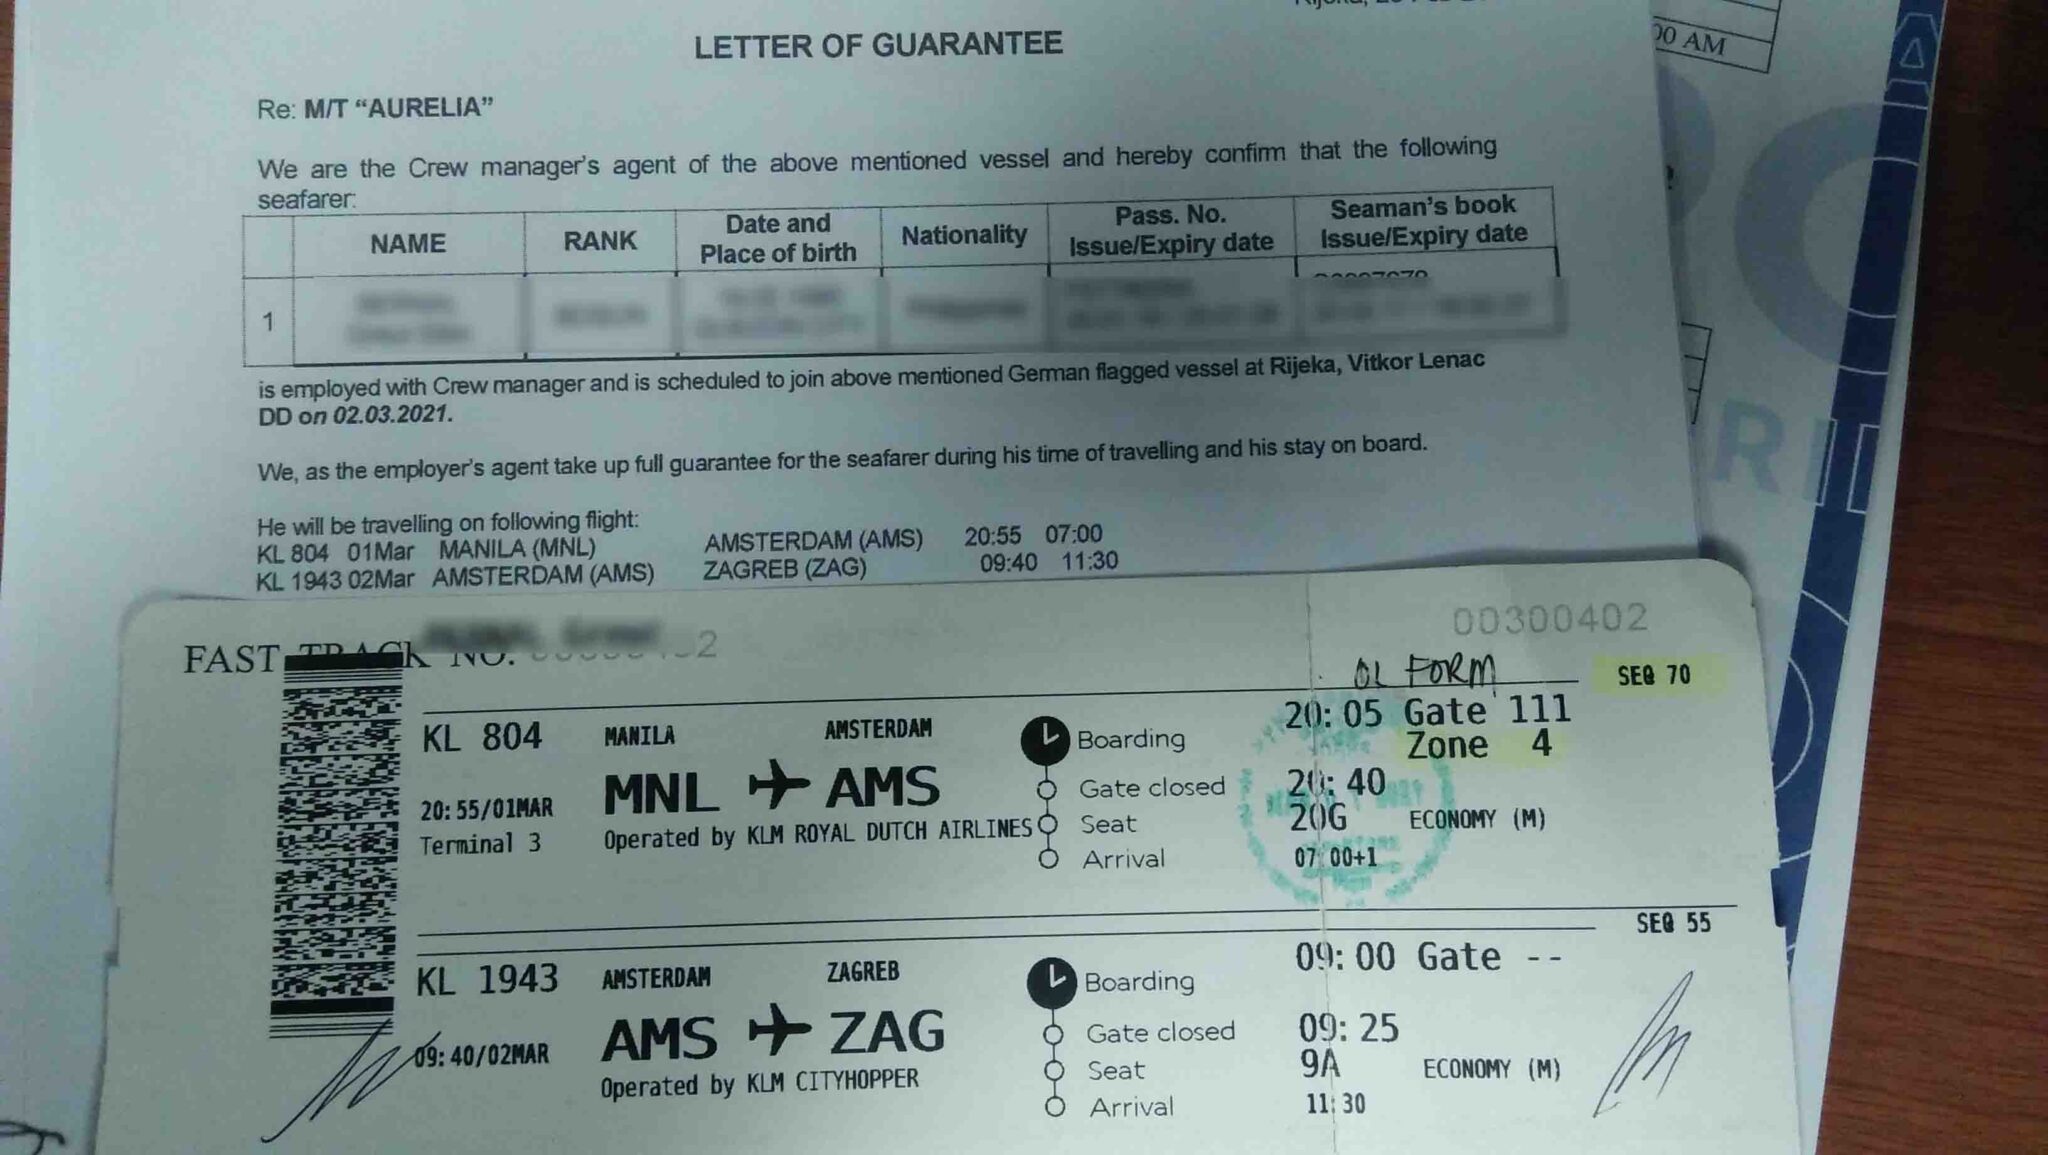 Letter of Guarantee and boarding pass.